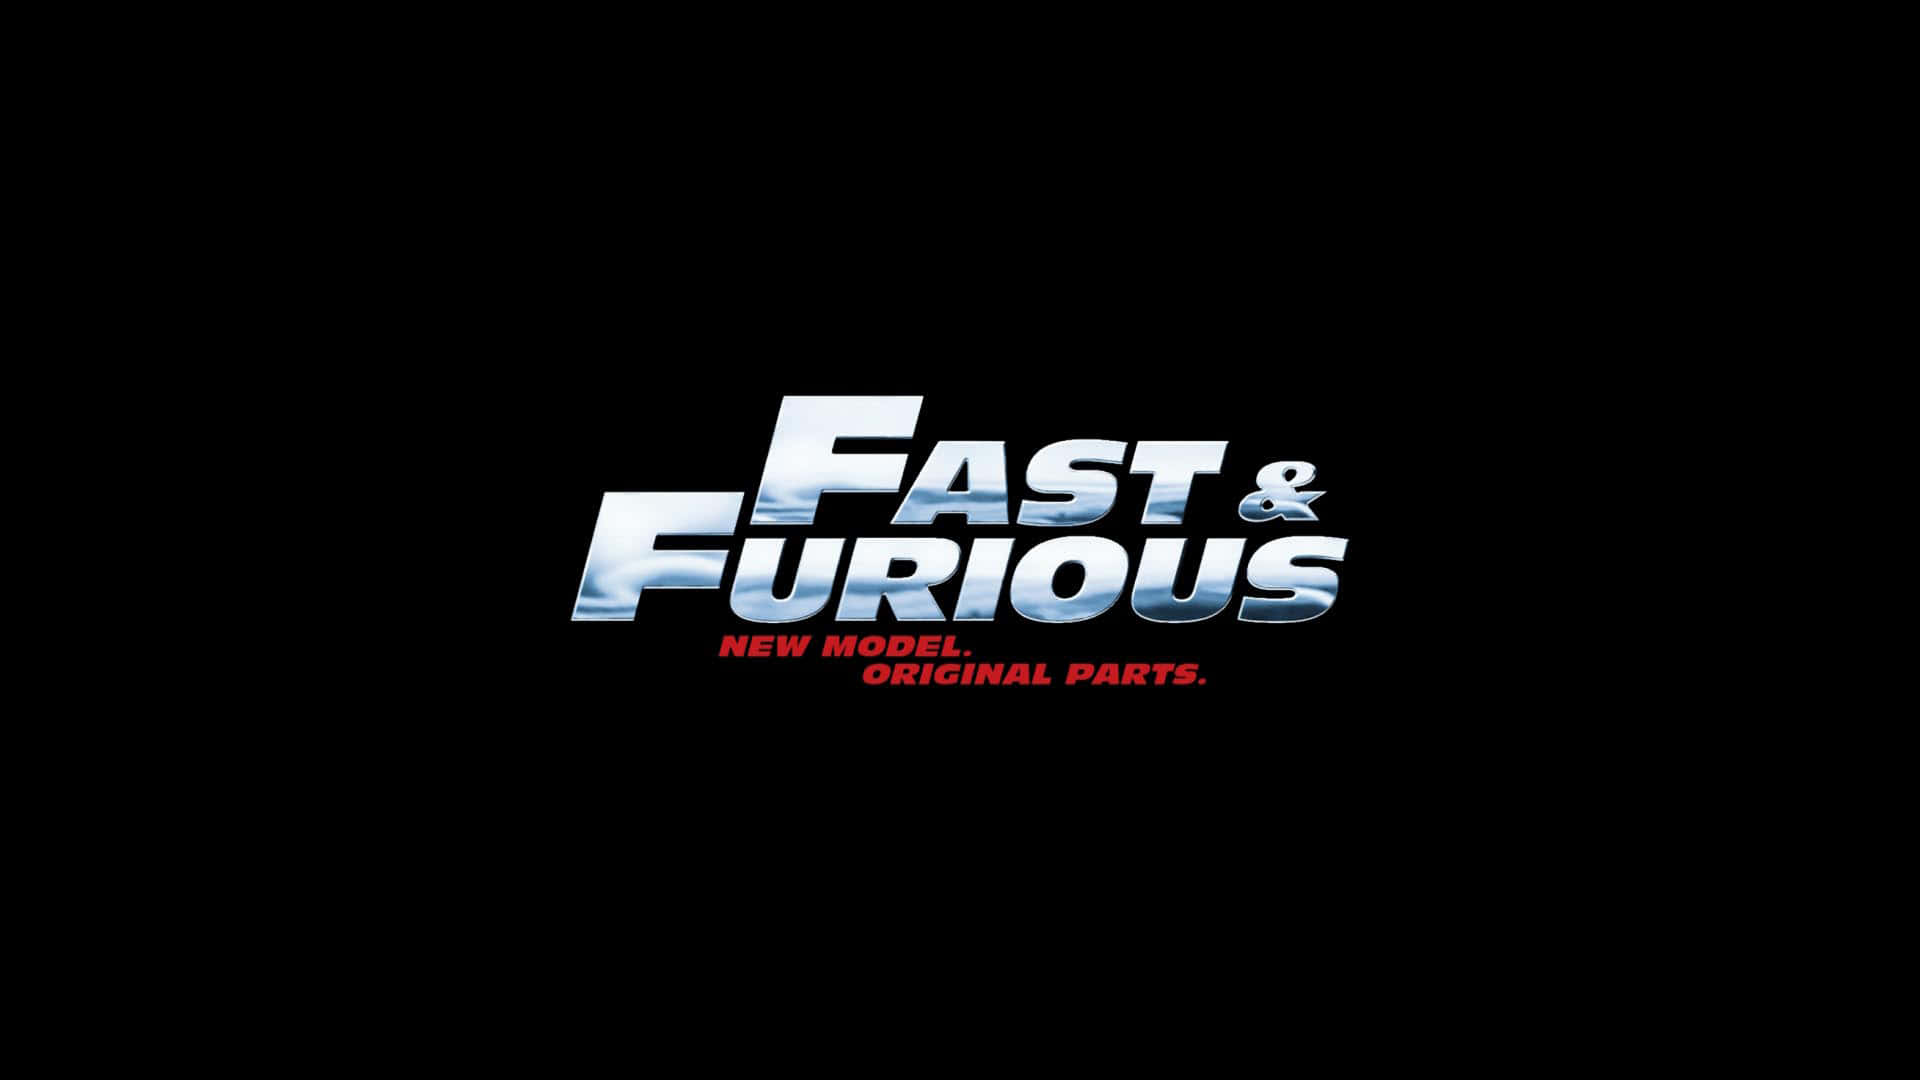 Enjoy the thrill and excitement of the acclaimed movie franchise with this HD Fast and Furious background.